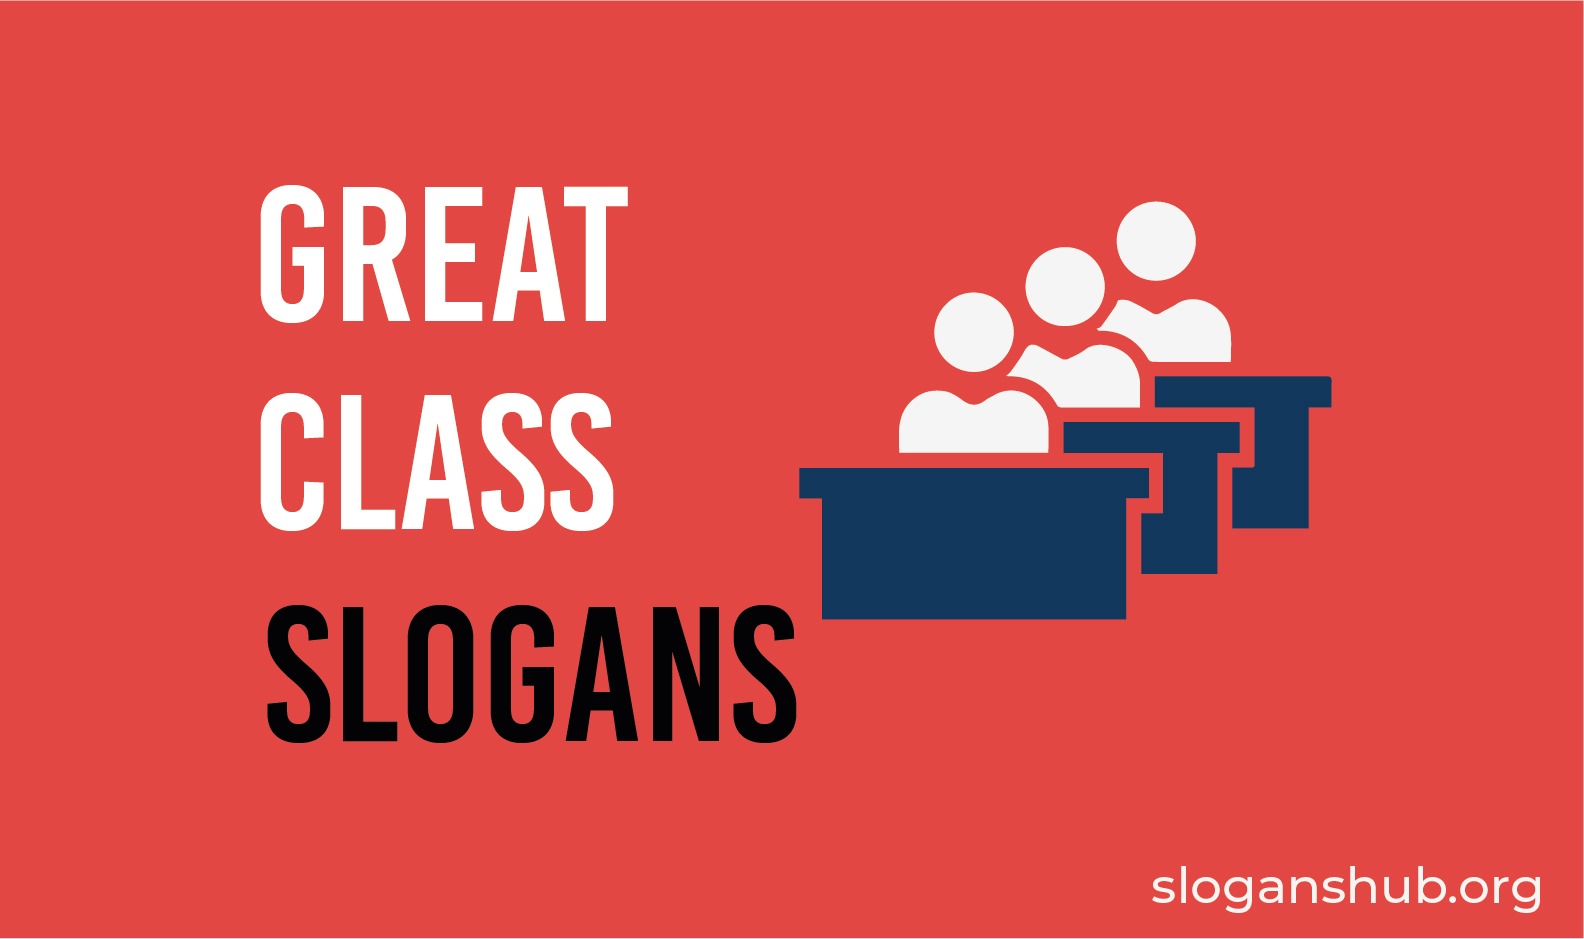 120 Great Class Slogans and Class Slogans for tshirts Slogans Hub